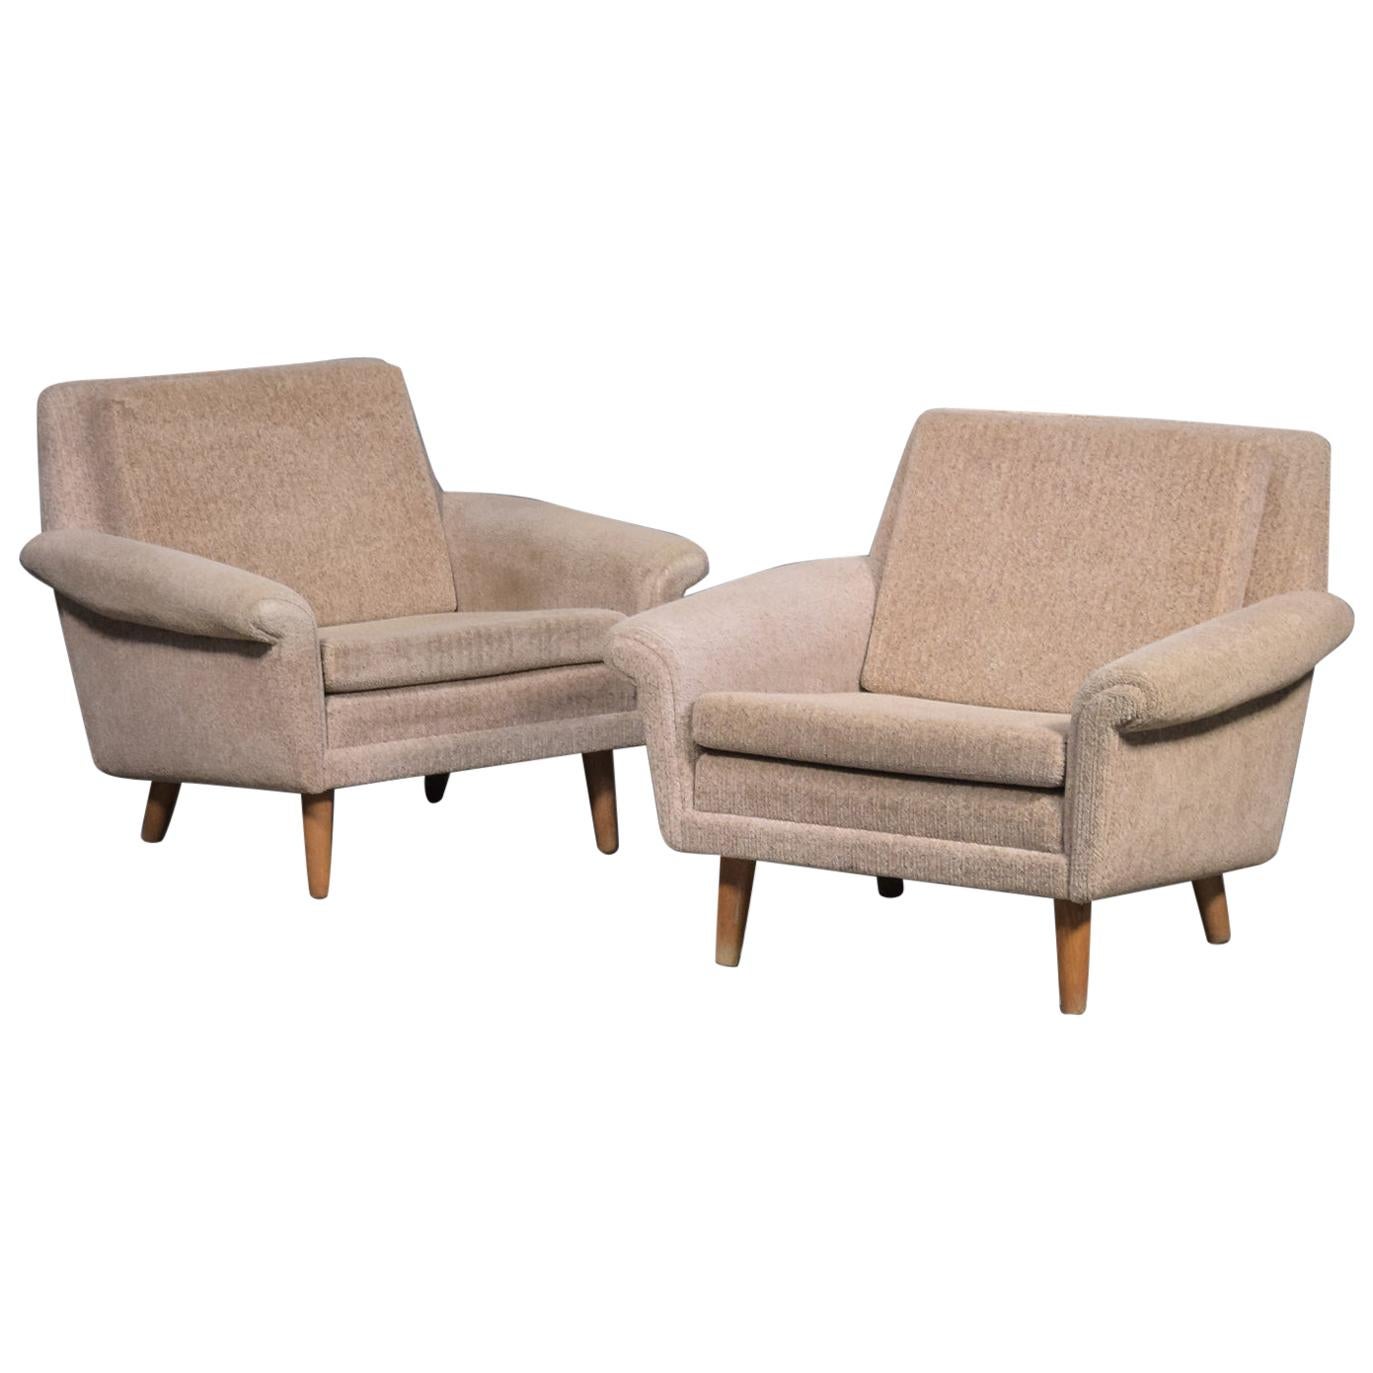 Pair of 1960s Easy Lounge Chairs Model Diplomat by Aage Christiansen for ERAN